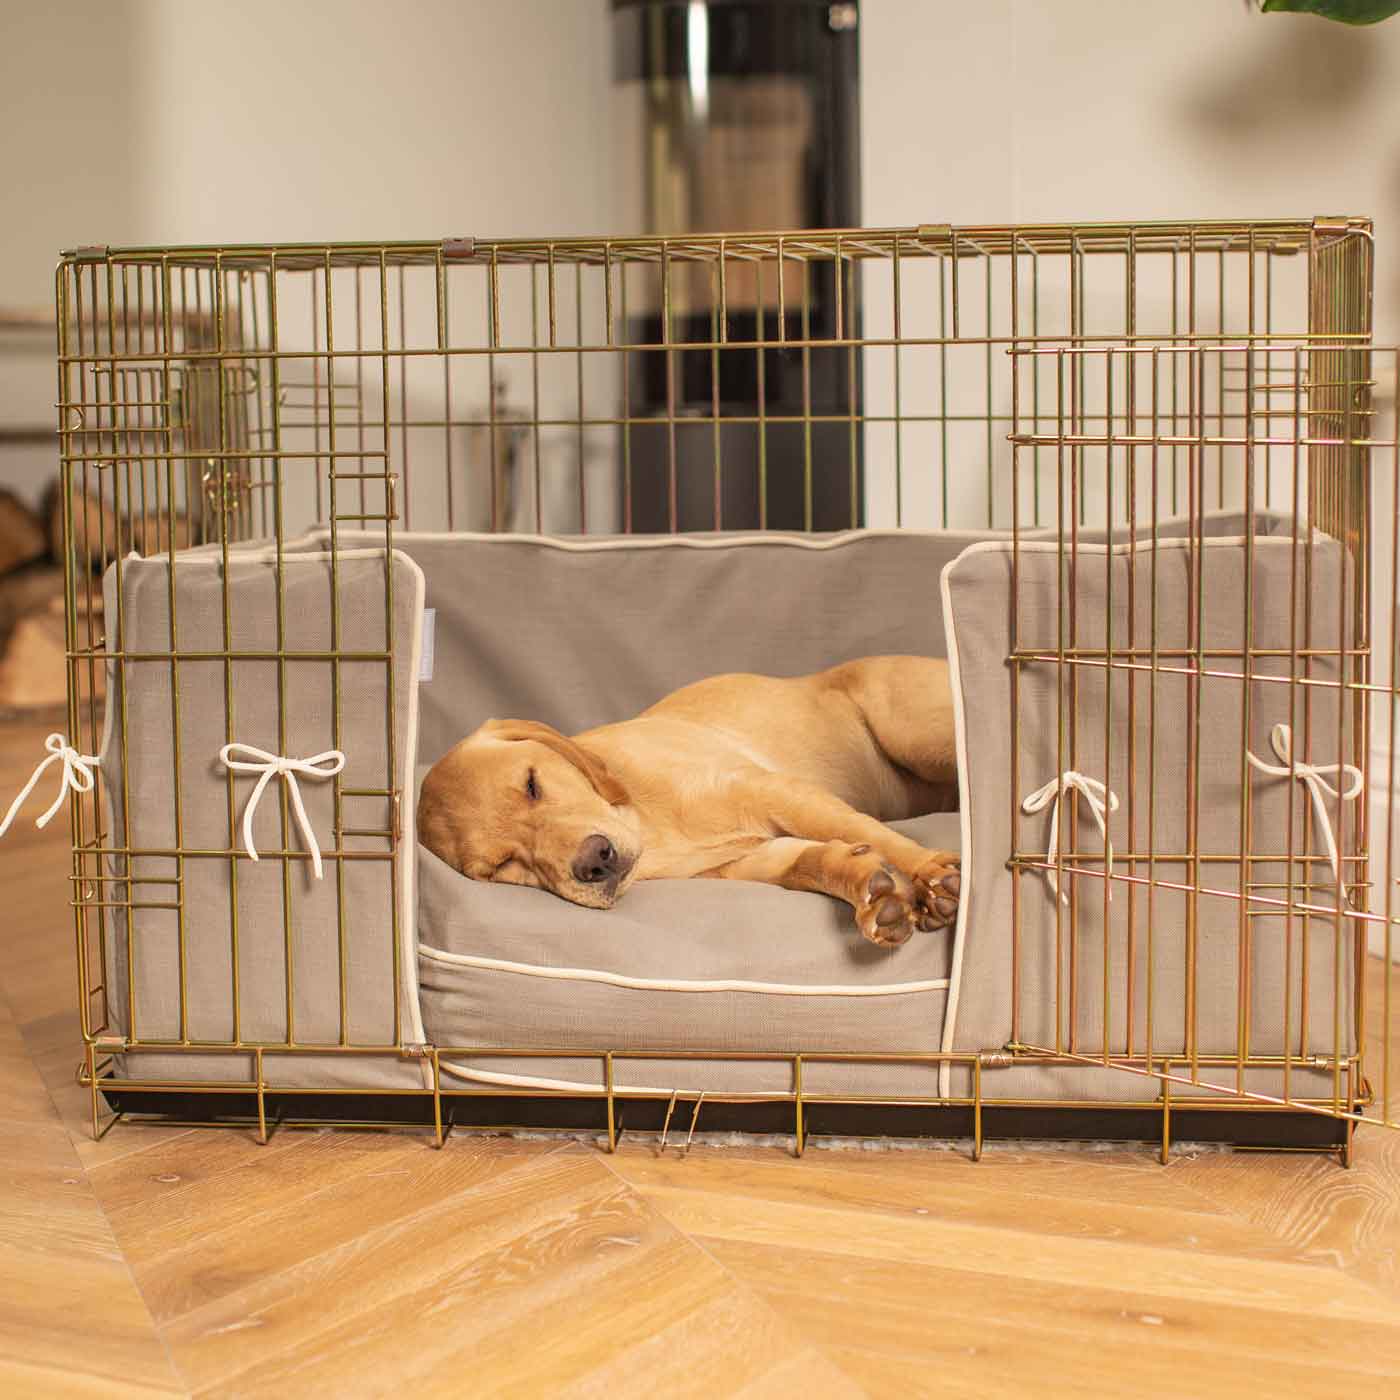 Dog Cage Bumper in Savanna Stone by Lords & Labradors